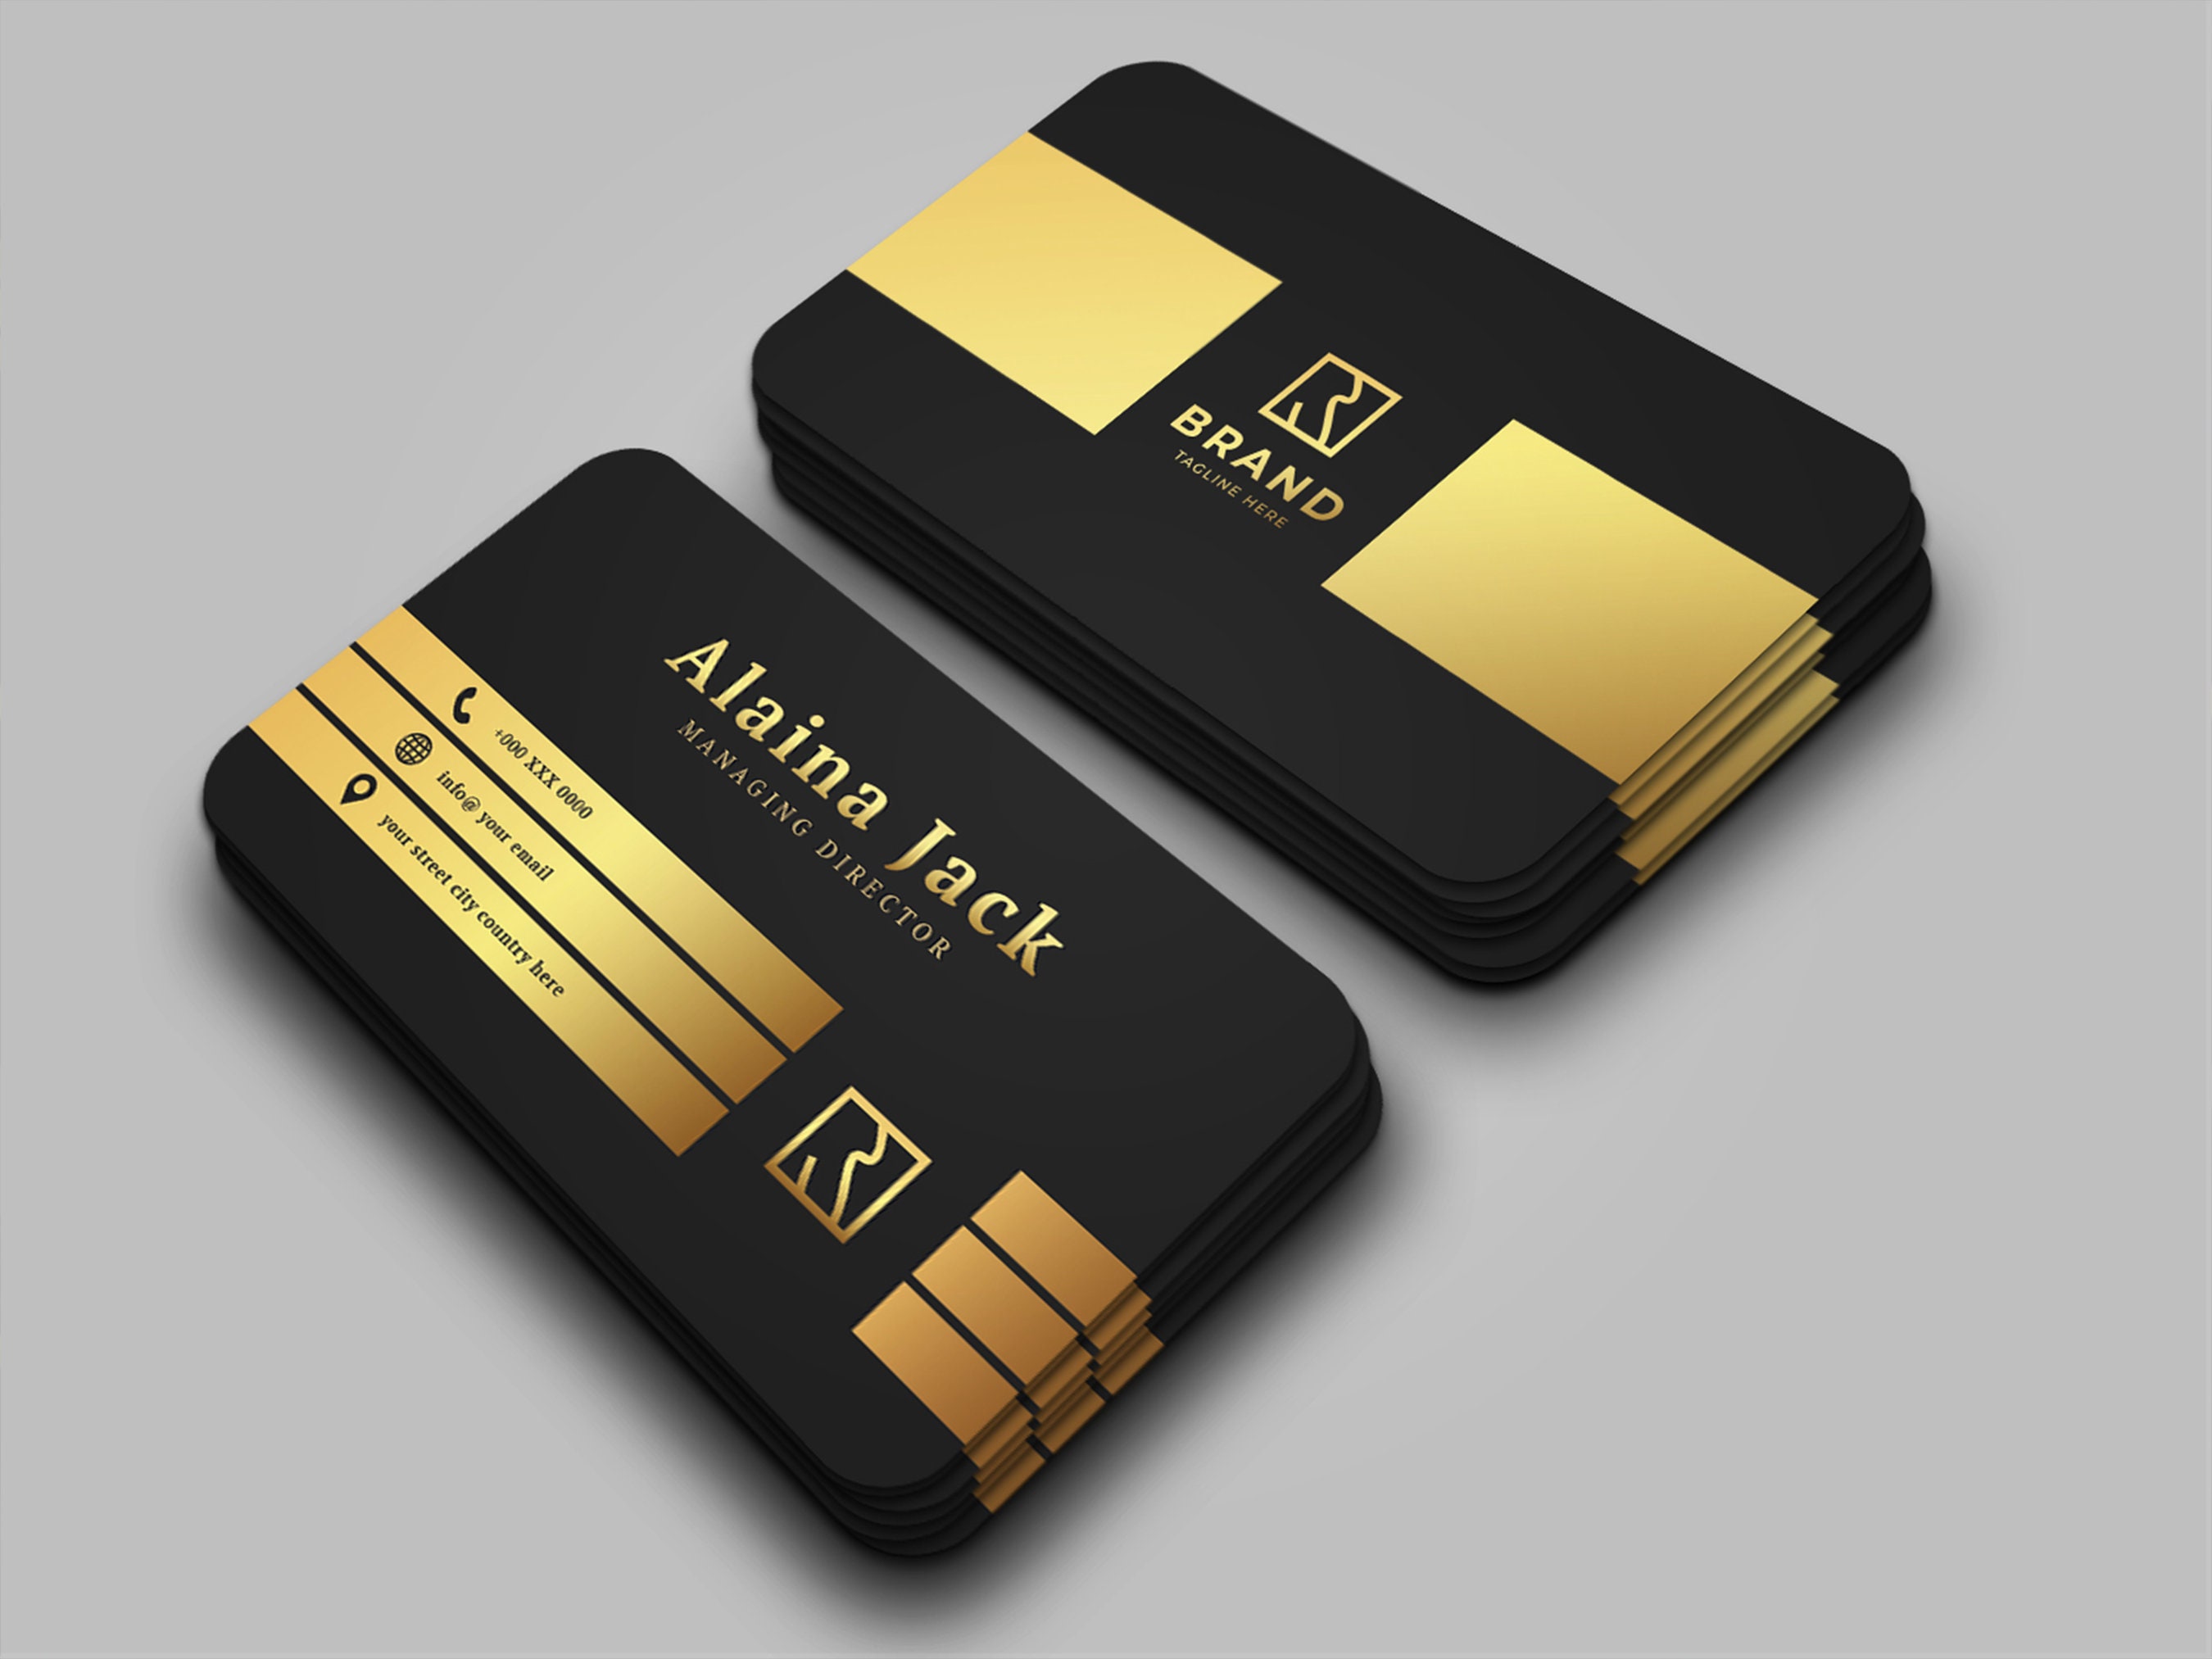 Print METAL ID cards ONLINE TODAY